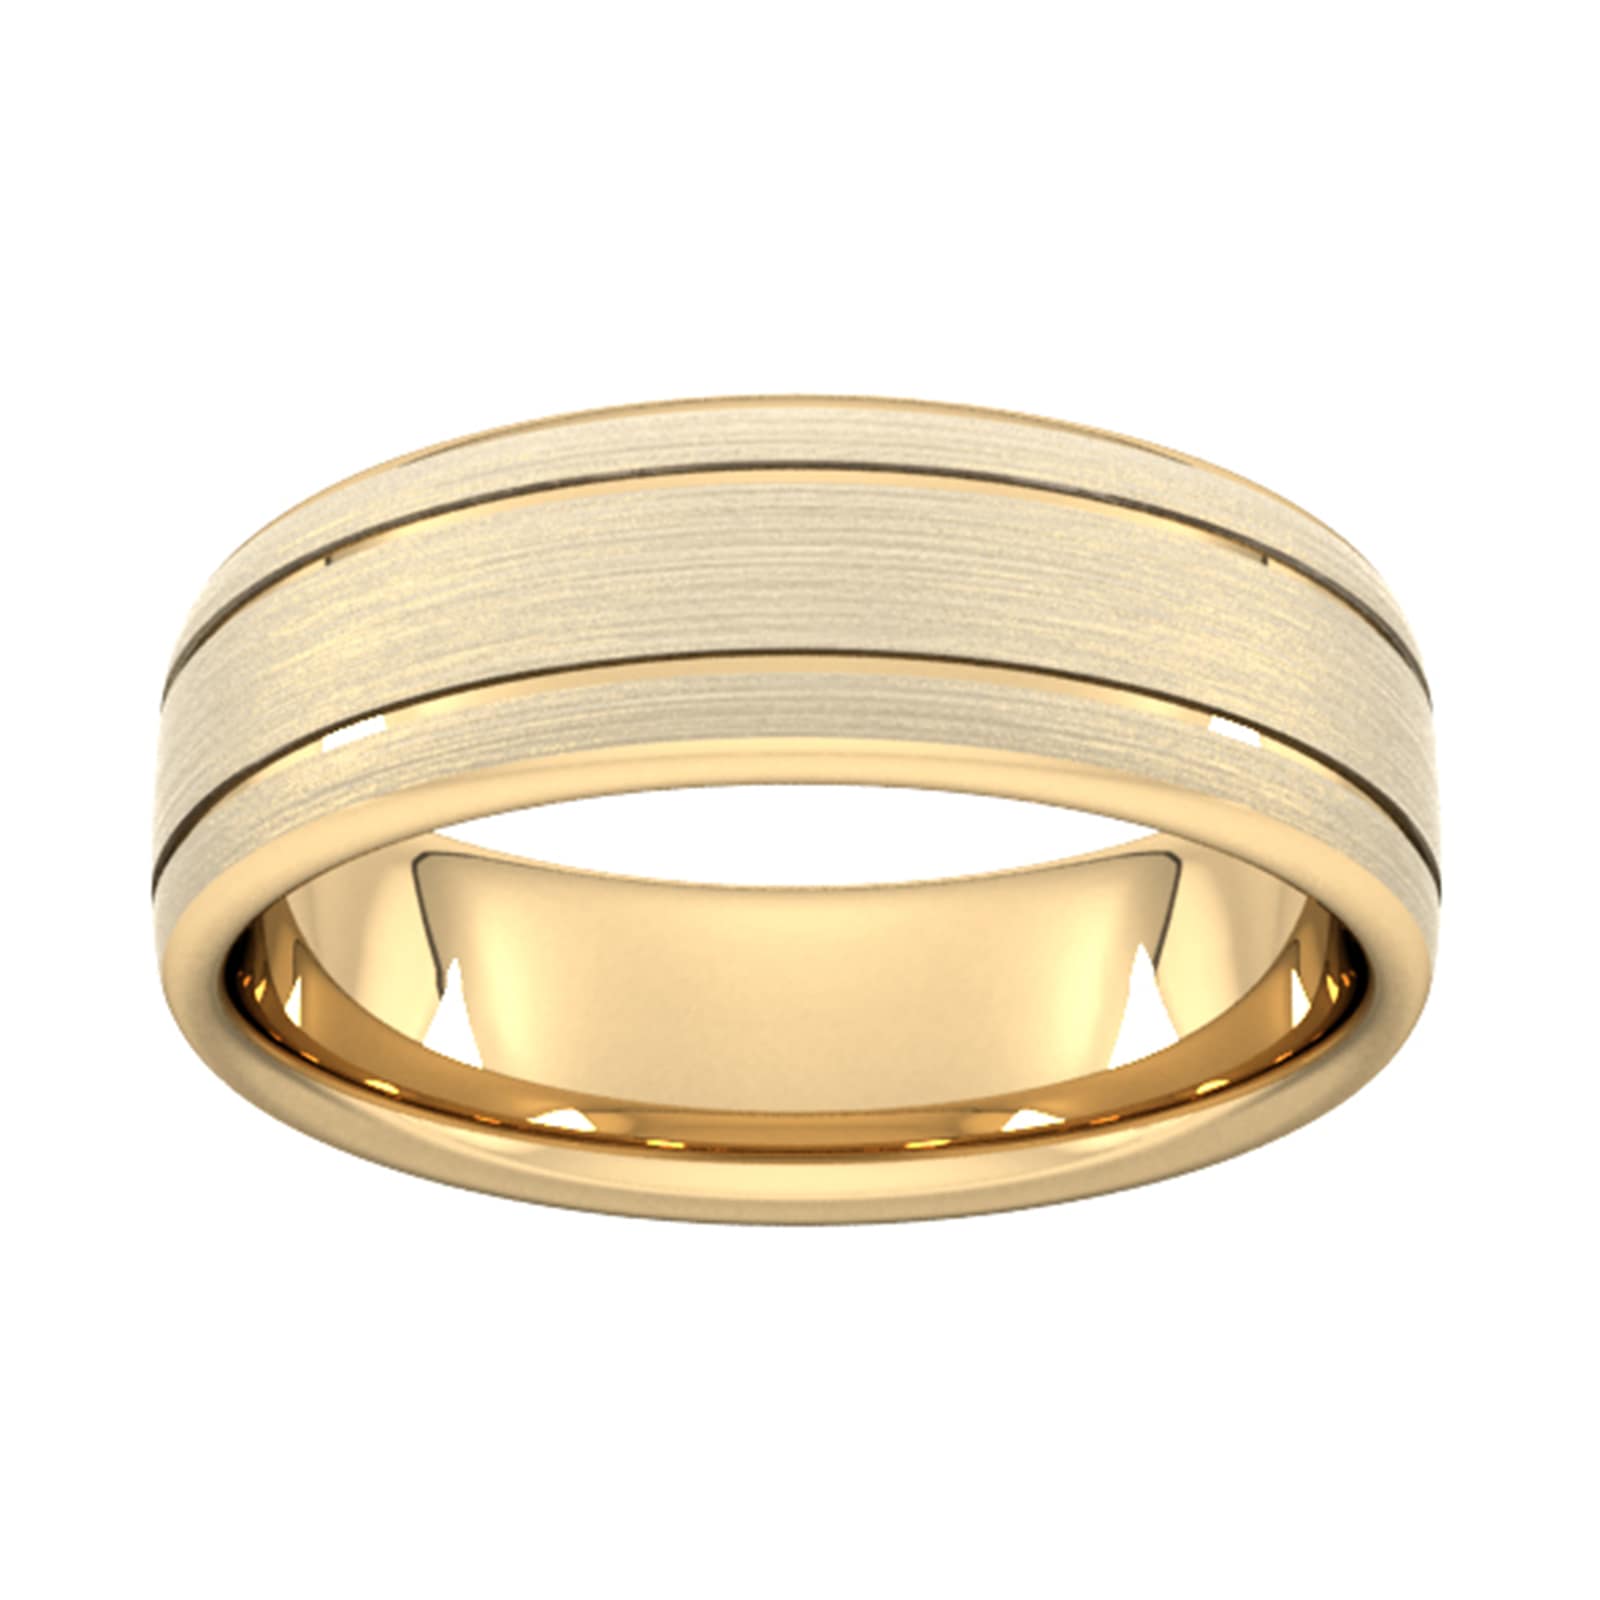 7mm Slight Court Extra Heavy Matt Finish With Double Grooves Wedding Ring In 9 Carat Yellow Gold - Ring Size W